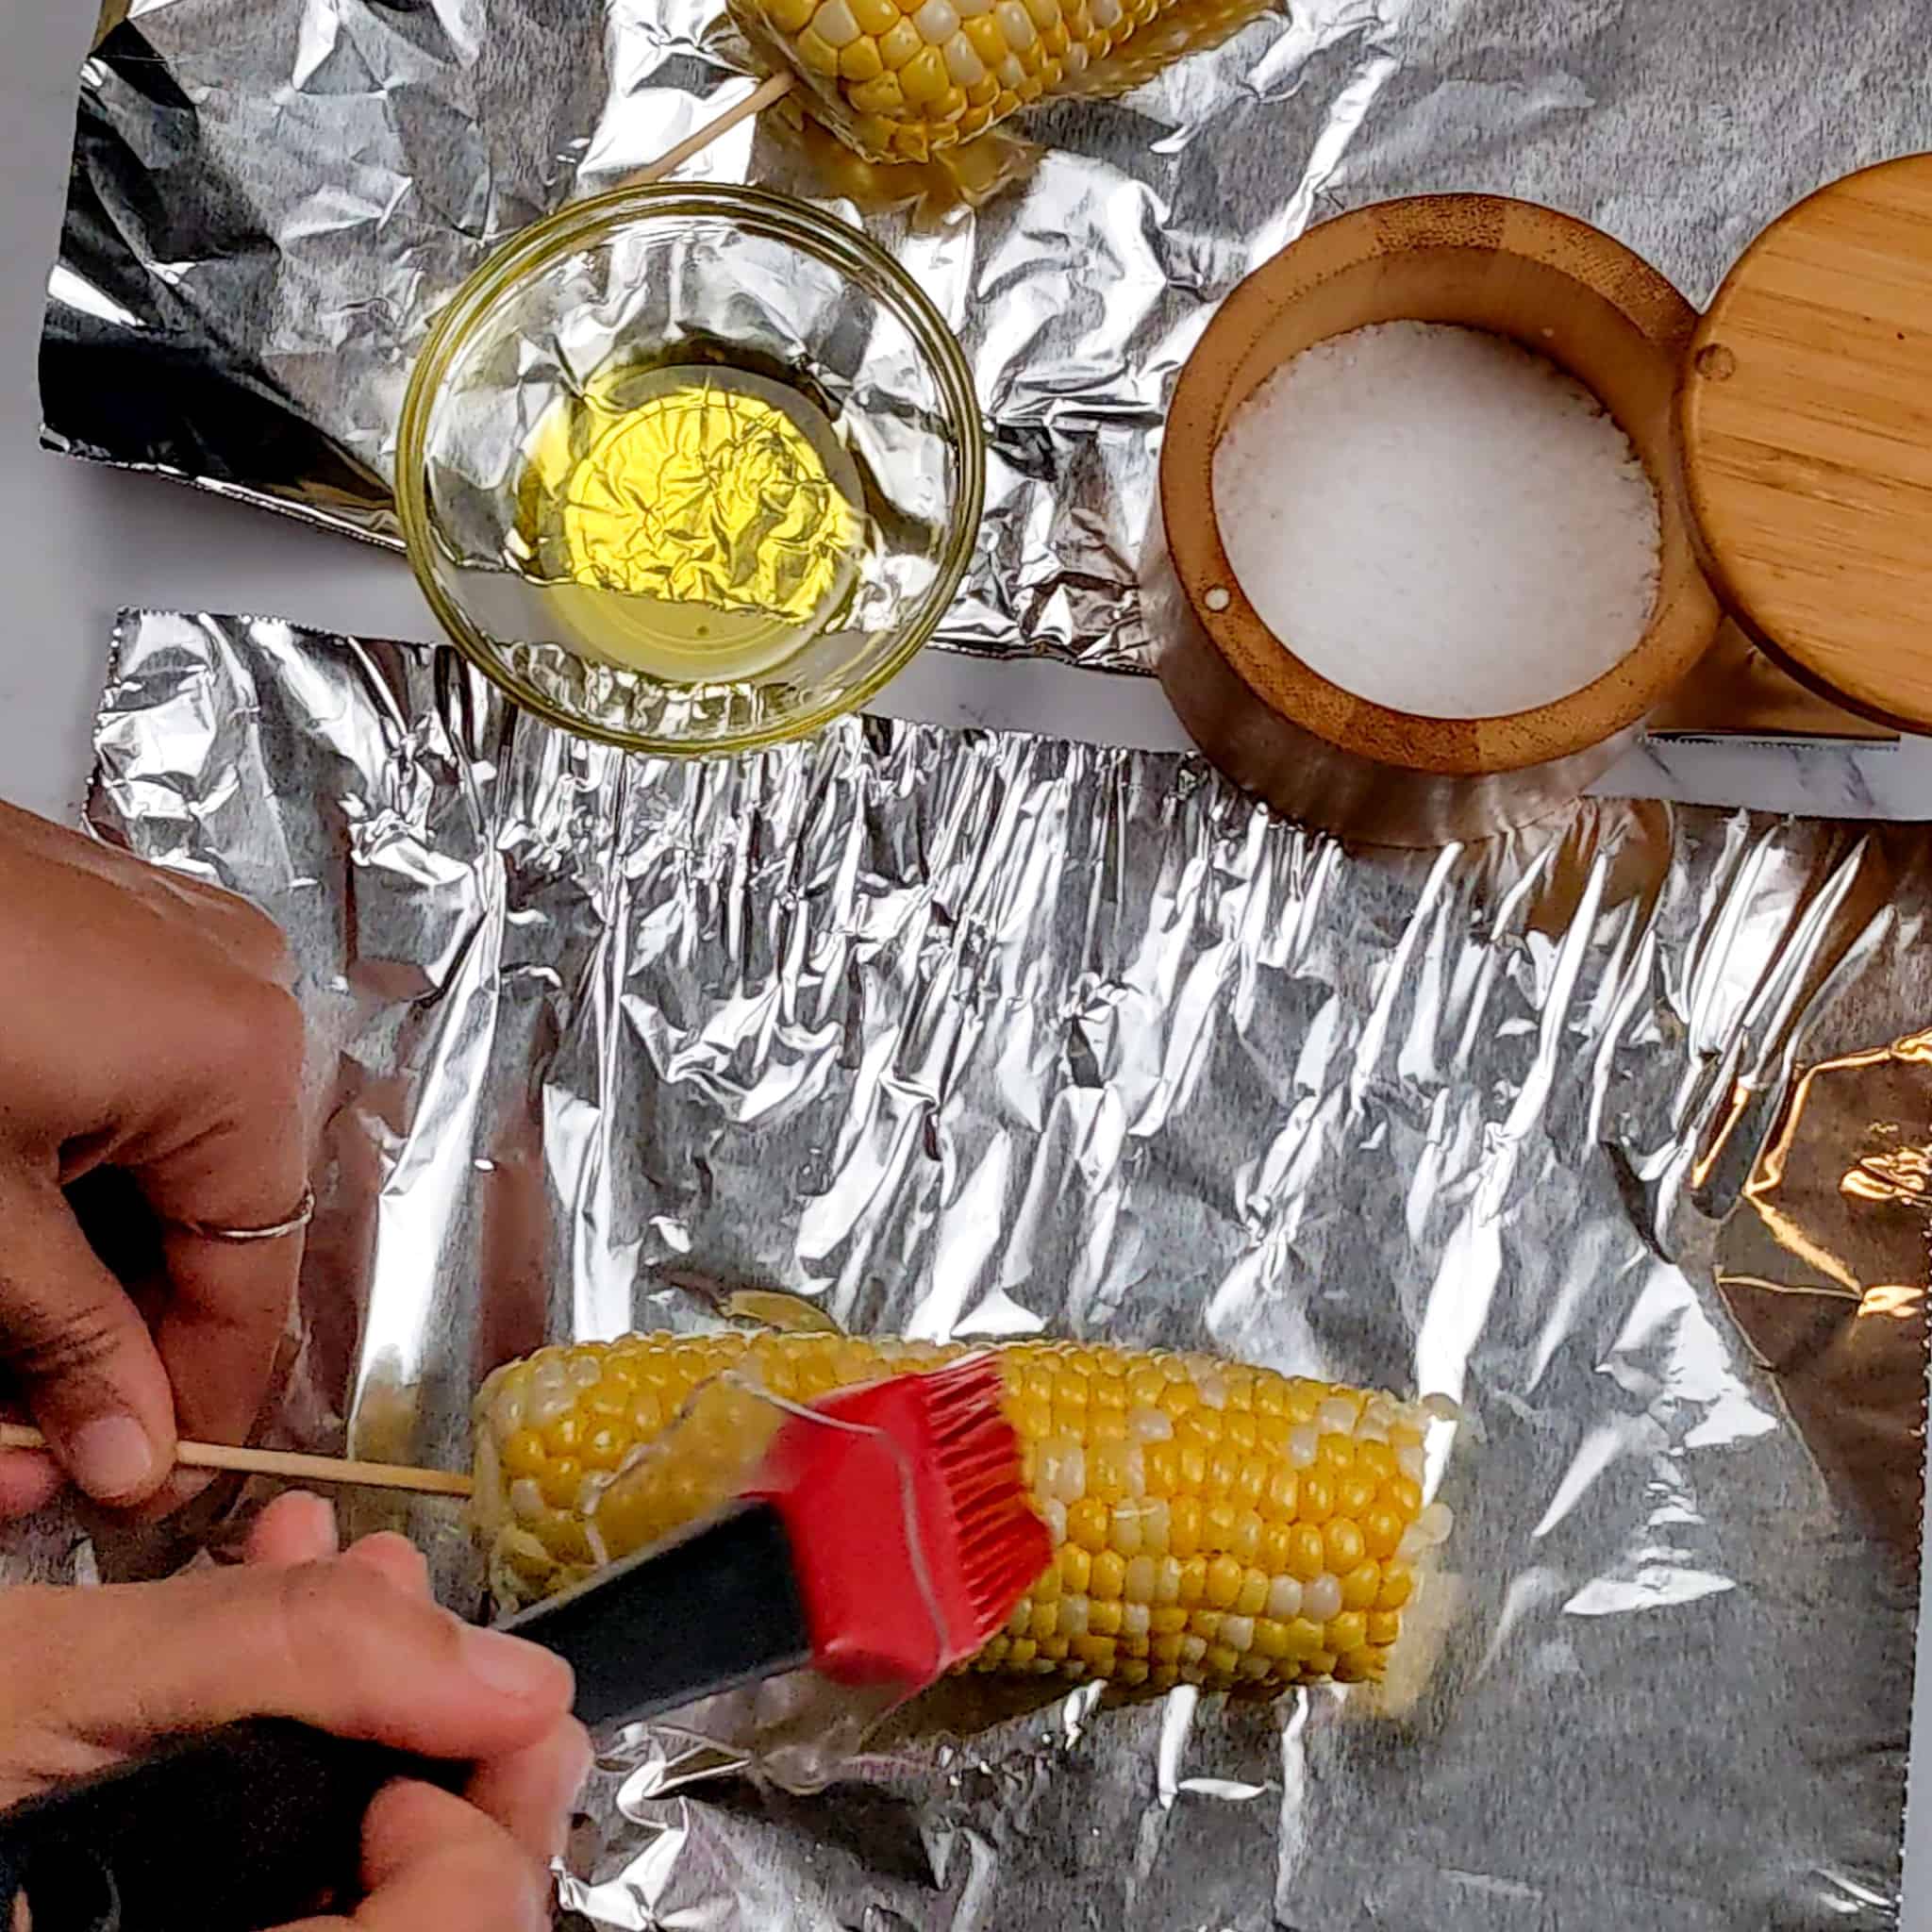 brushing olive oil on the corn with a pastry brush on aluminum foil surrounded by a salt cellar and a bowl of olive oil